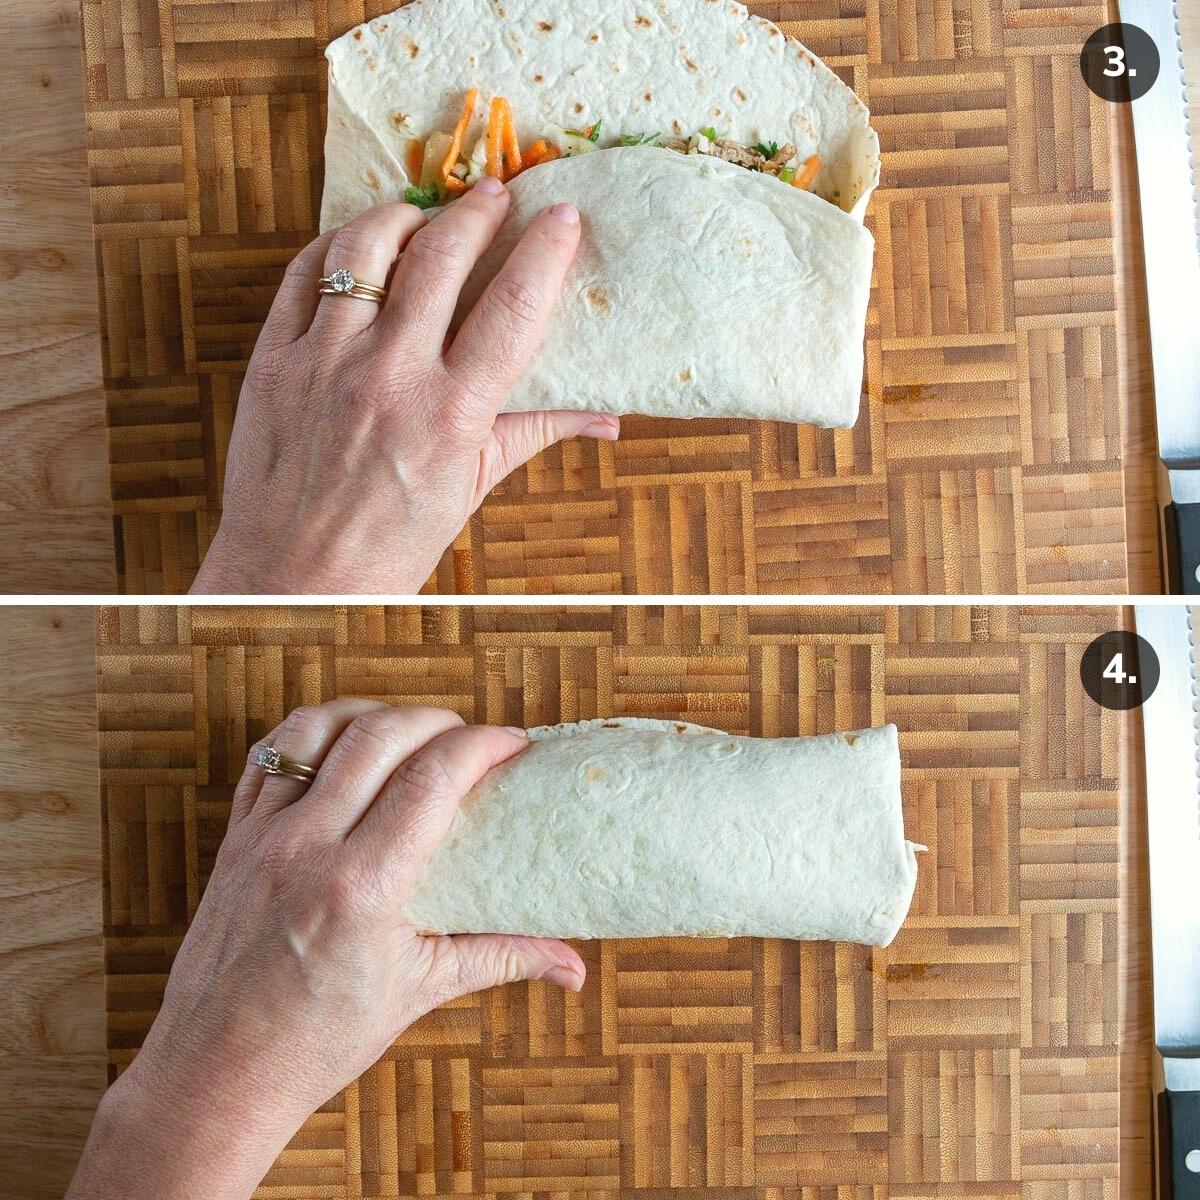 Rolling up a burrito.